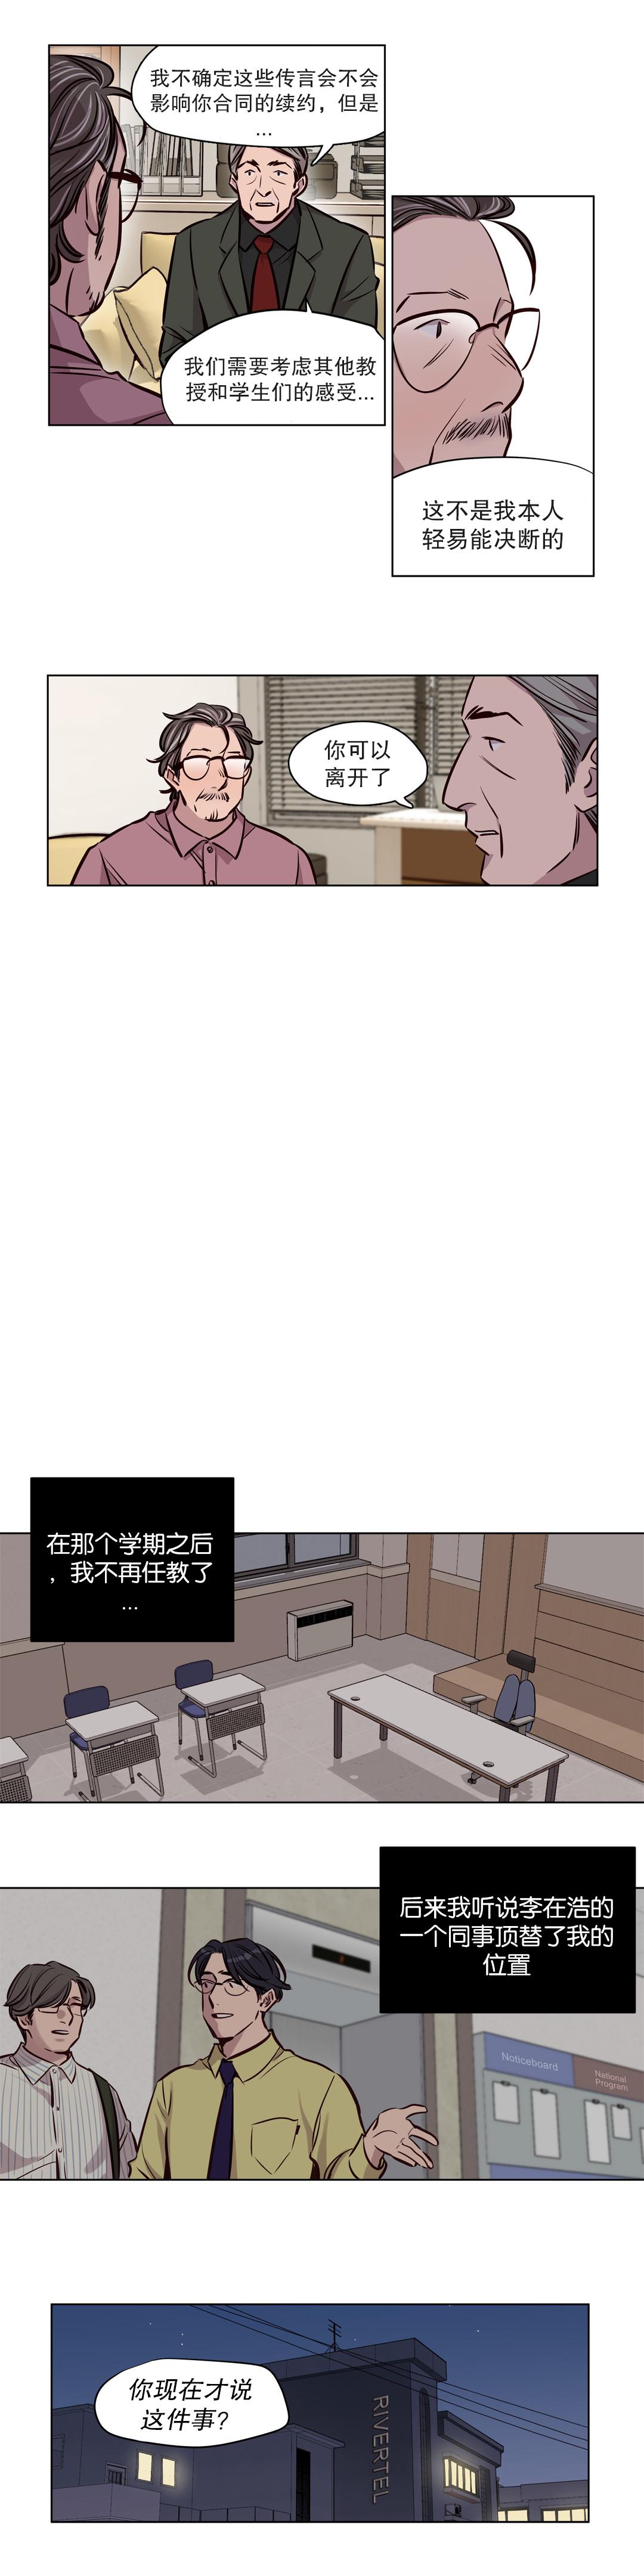 Gay Bang [Ramjak] 赎罪营(Atonement Camp) Ch.50-52 (Chinese) Brother Sister - Page 5